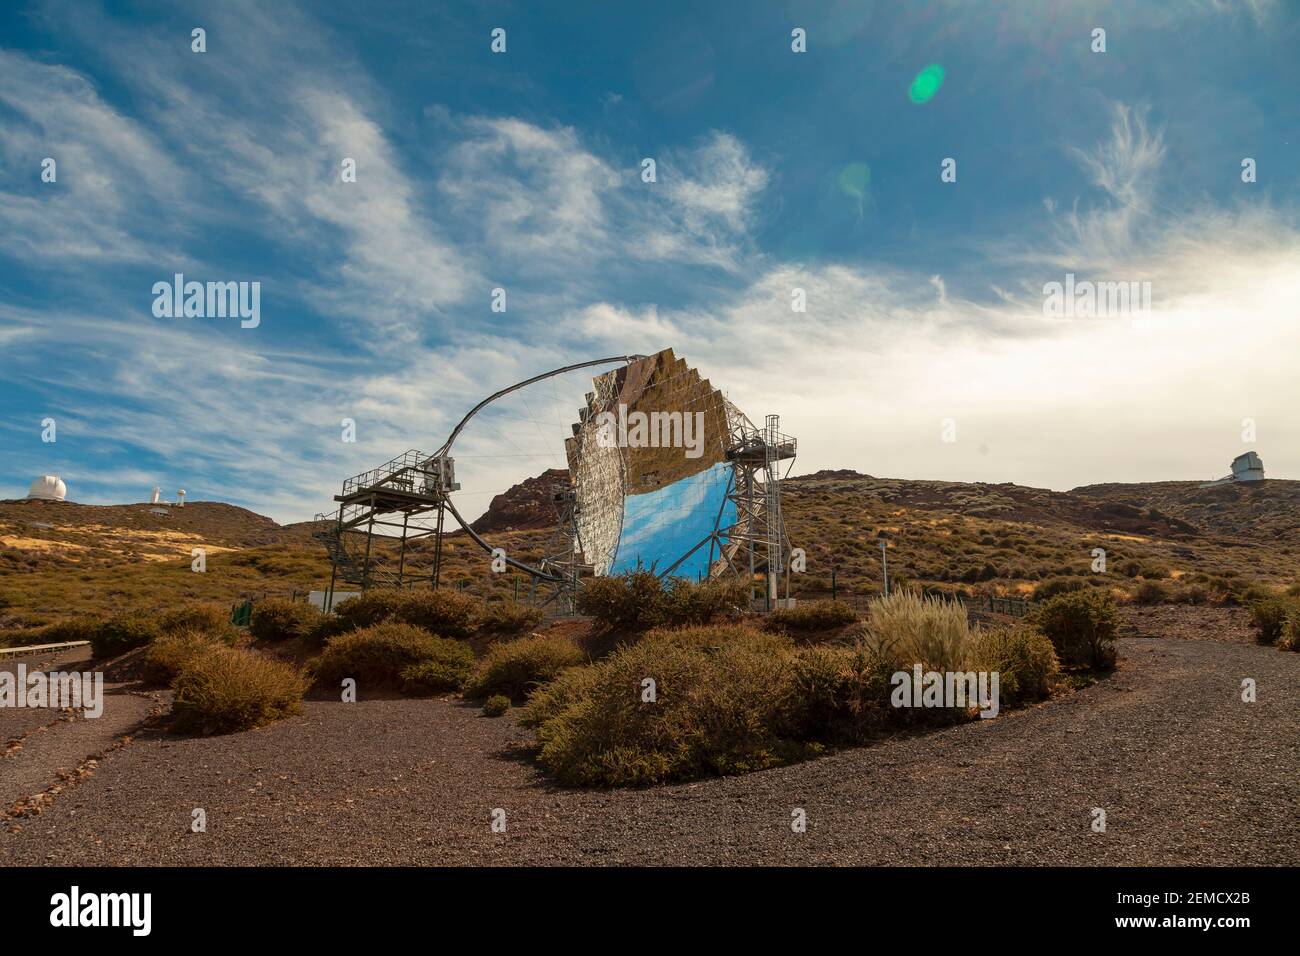 La Palma, Spain - November 1, 2016: CTA LST1 Telescope, one of the MAGIC Telescopes group, at the Roque de los Muchachos Observatory, ORM, astronomica Stock Photo